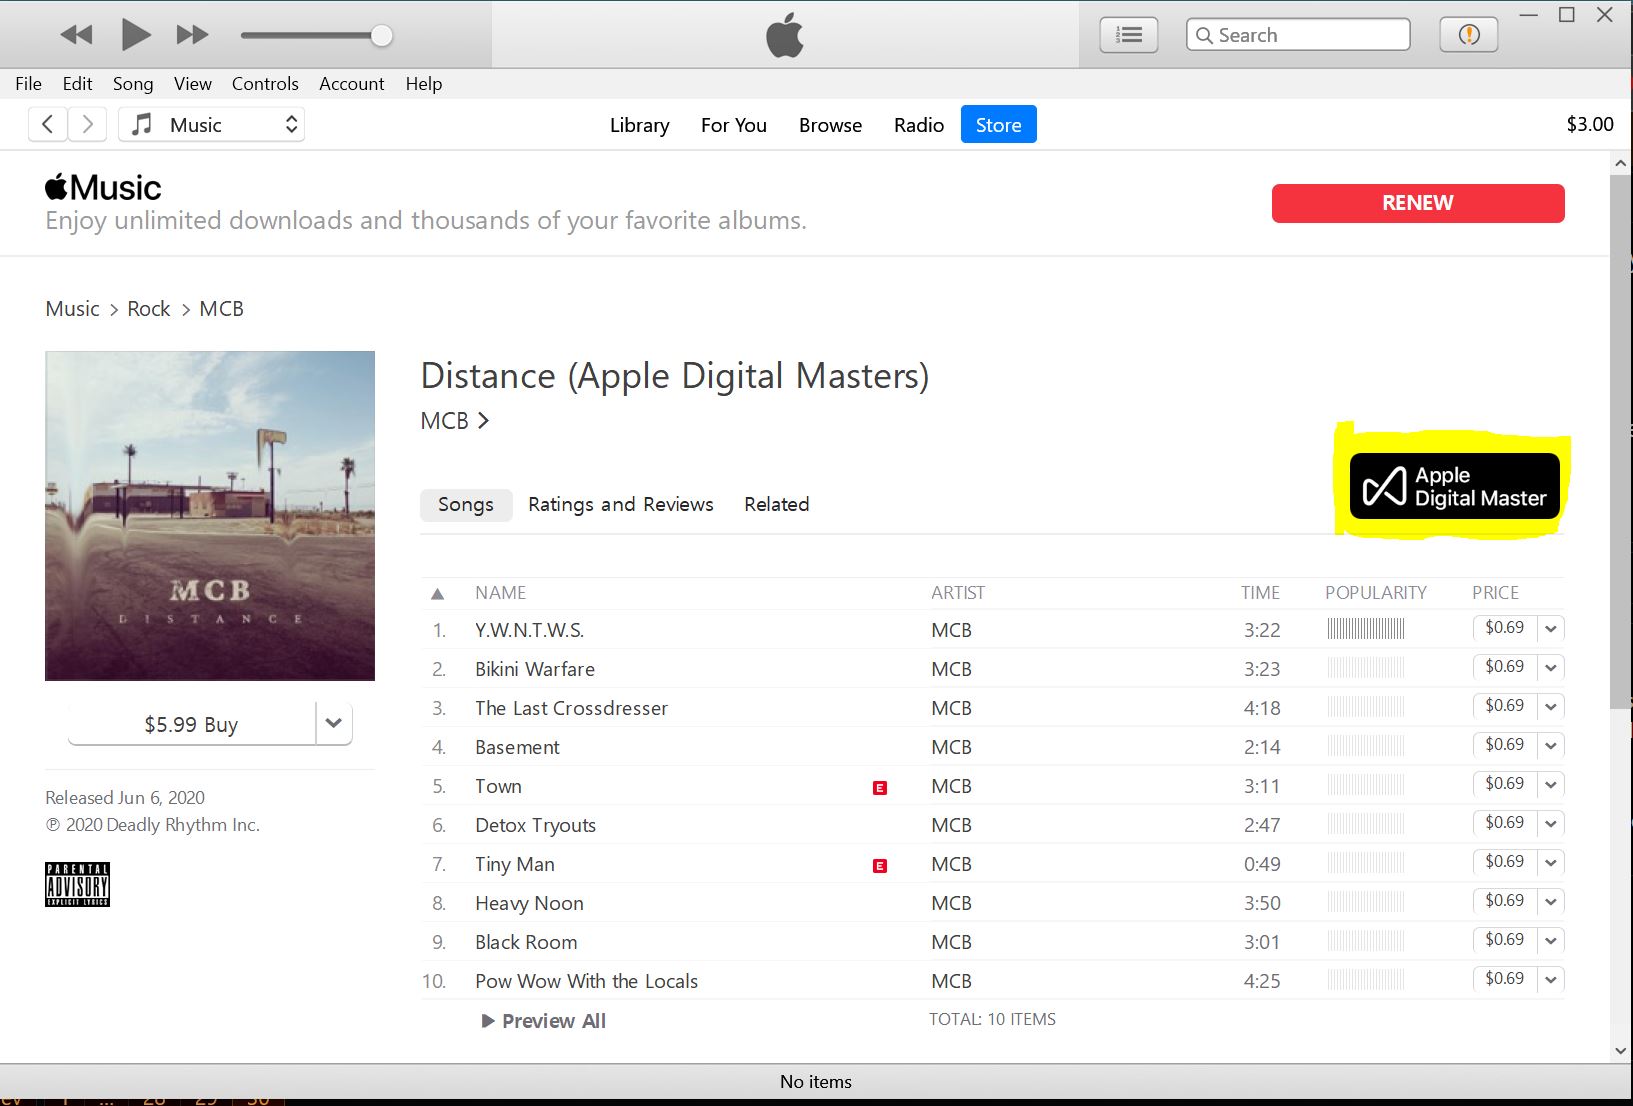 apple digital masters search on itunes windows app - track shows icon logo for ADM.JPG